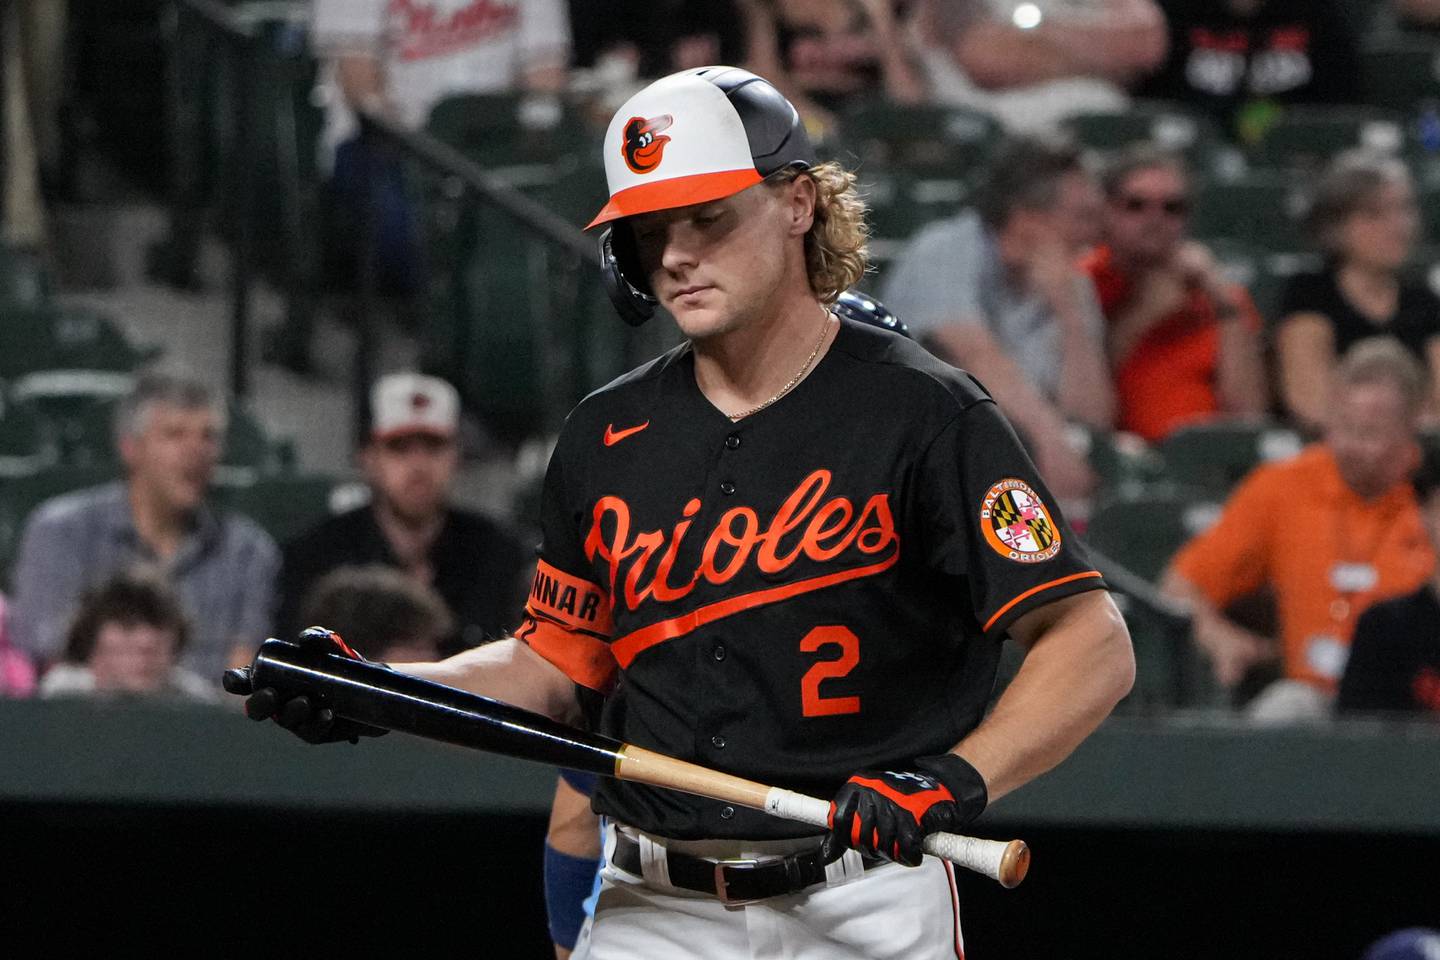 Baltimore Orioles pinch hitter Gunnar Henderson (2) reacts to being the final strikeout of a game against the Tampa Bay Rays in Baltimore on Monday, May 8. The Rays and Orioles played the first game of a series on Monday.